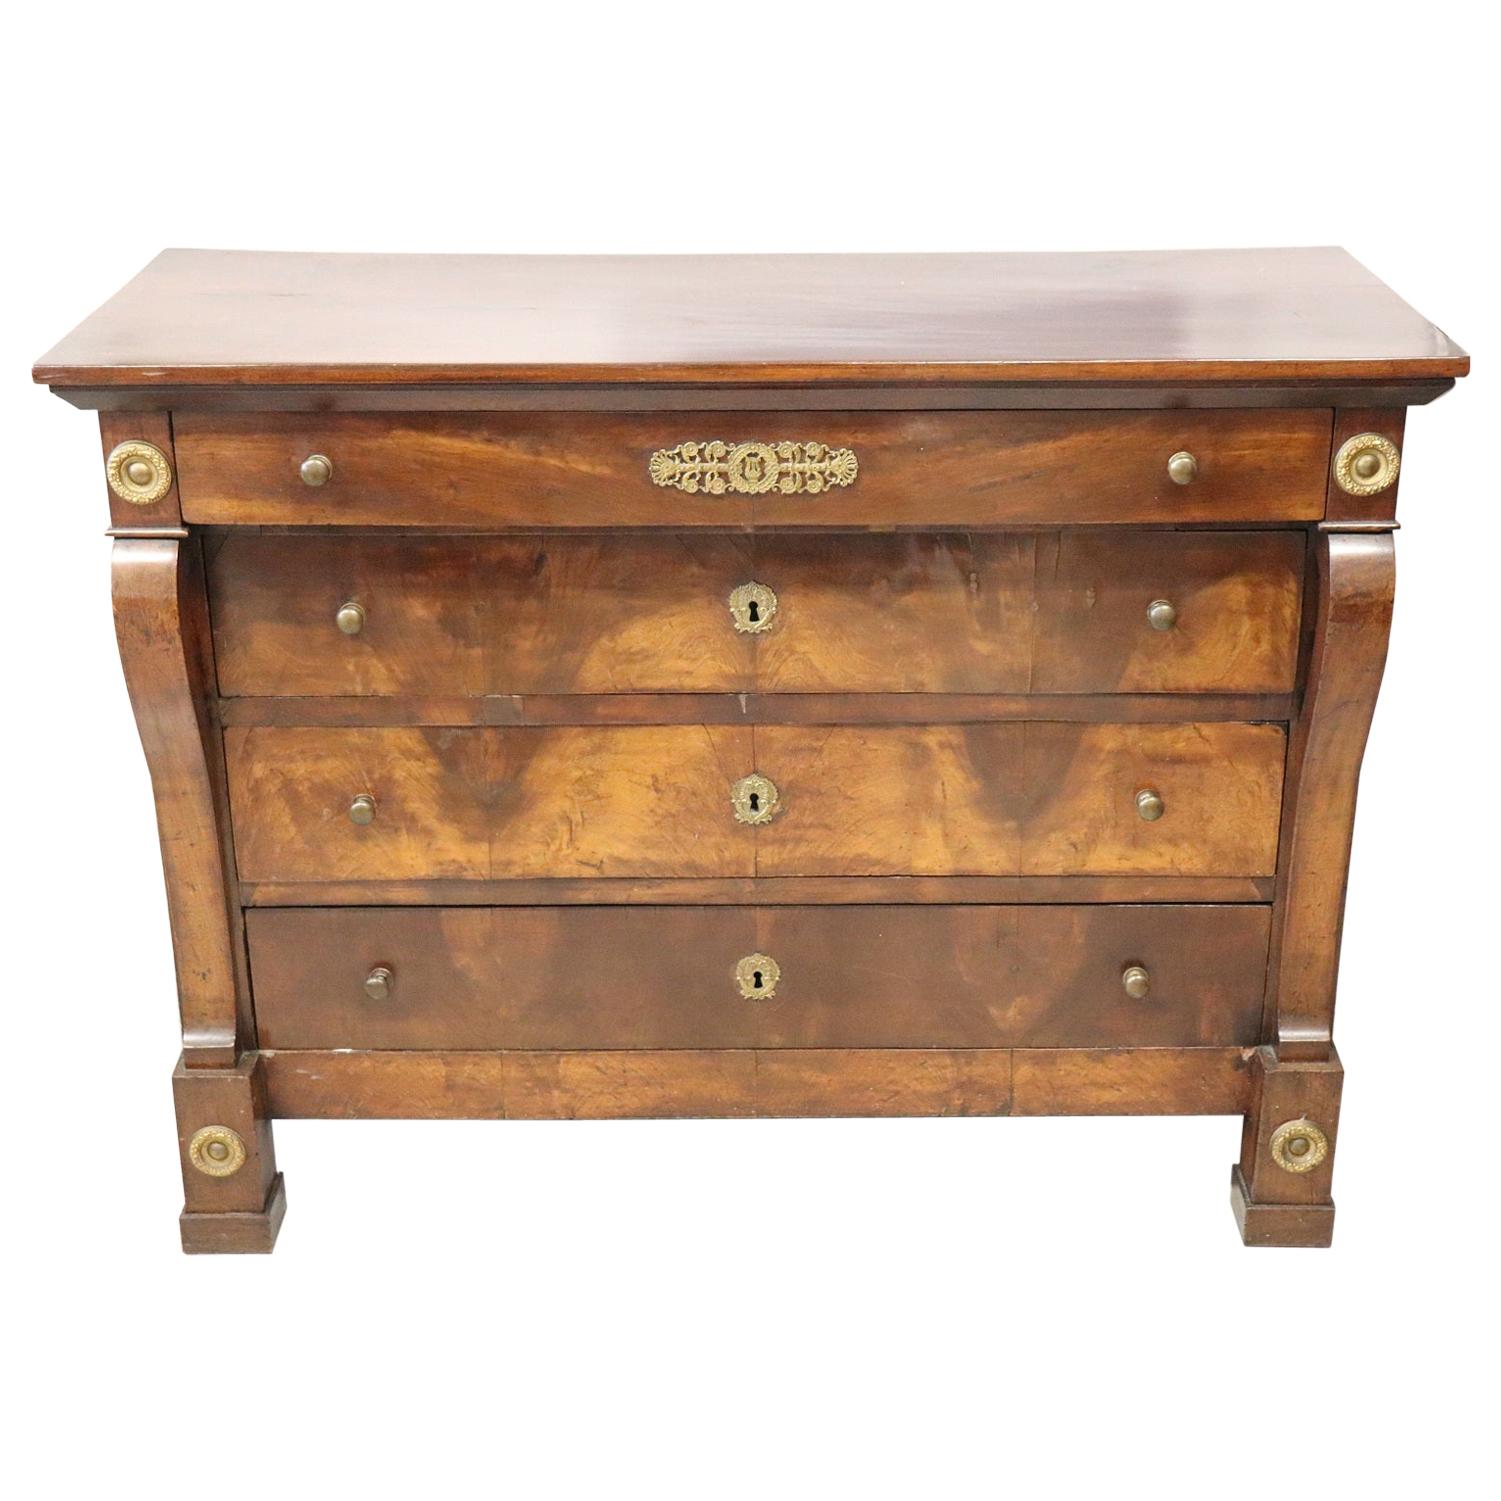 19th Century Italian Empire Walnut Commode or Chest of Drawers